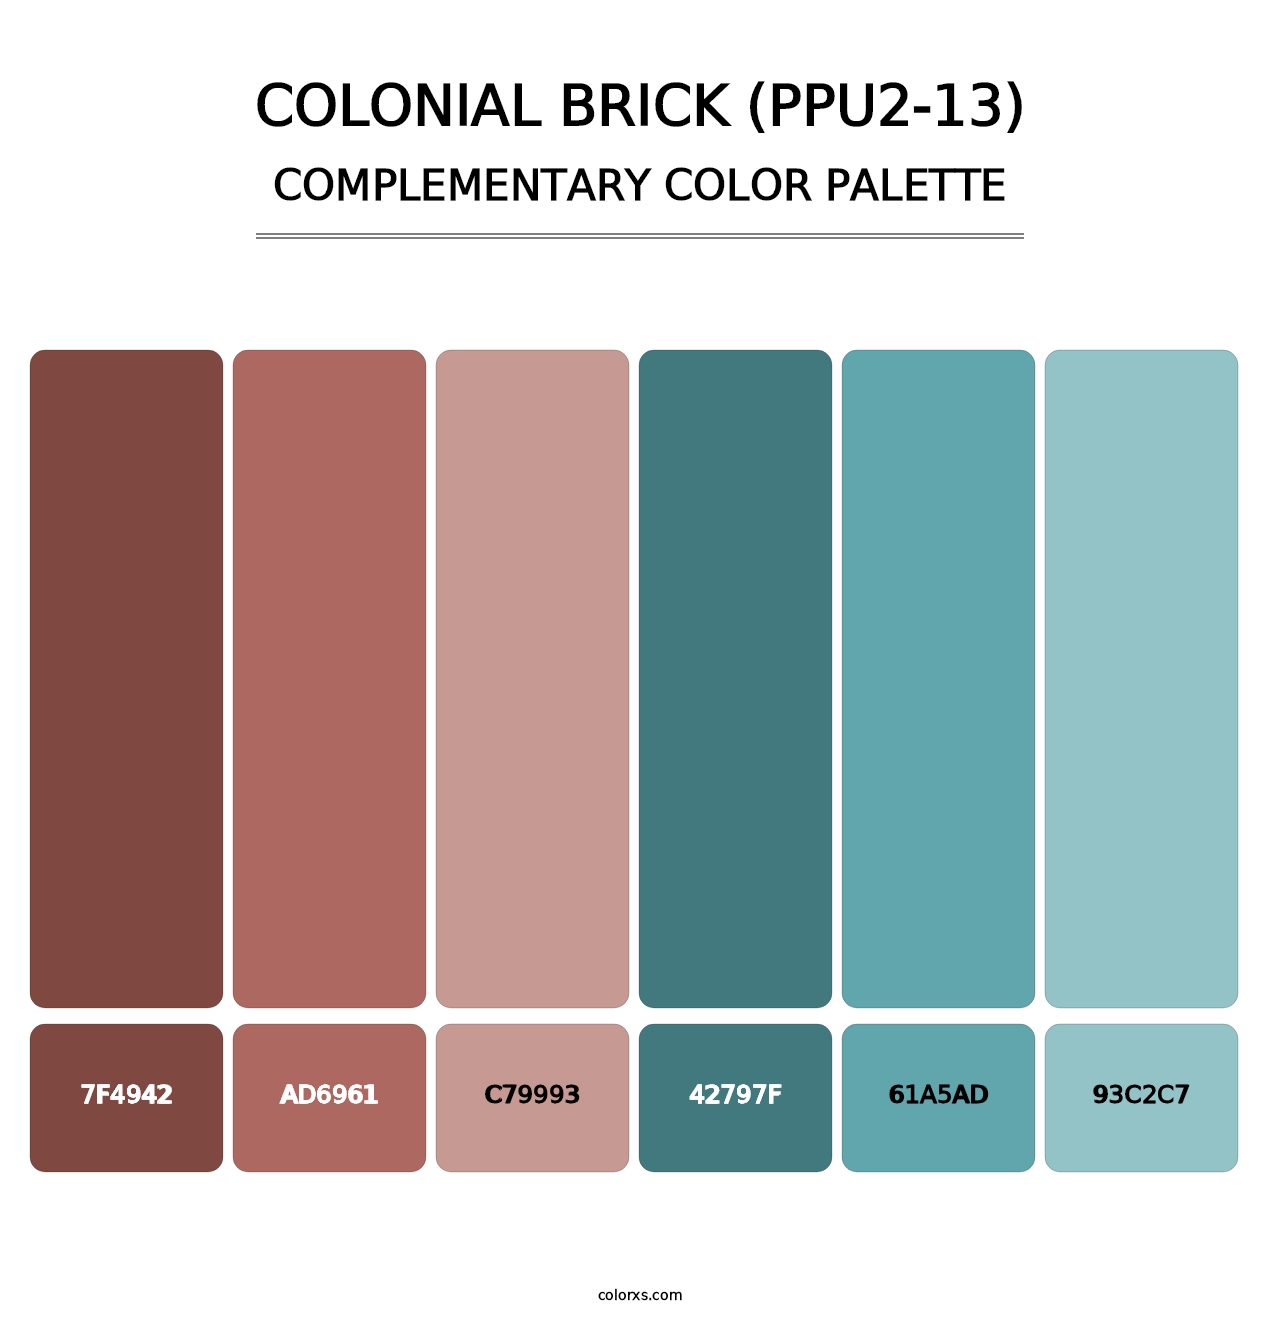 Colonial Brick (PPU2-13) - Complementary Color Palette